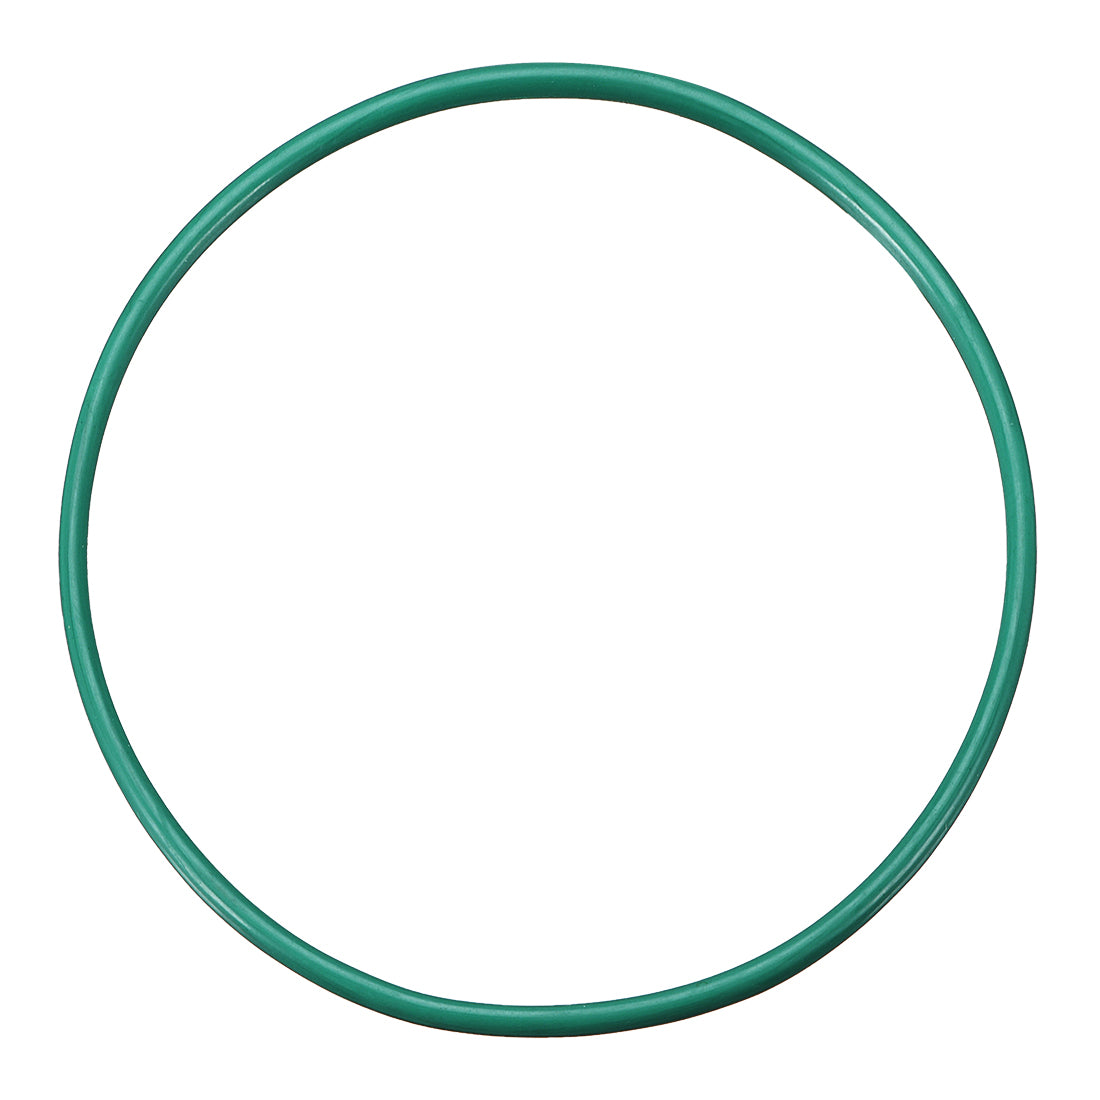 uxcell Uxcell O-Rings Fluorine Rubber 75mm x 80.3mm x 2.65mm Seal Rings Sealing Gasket